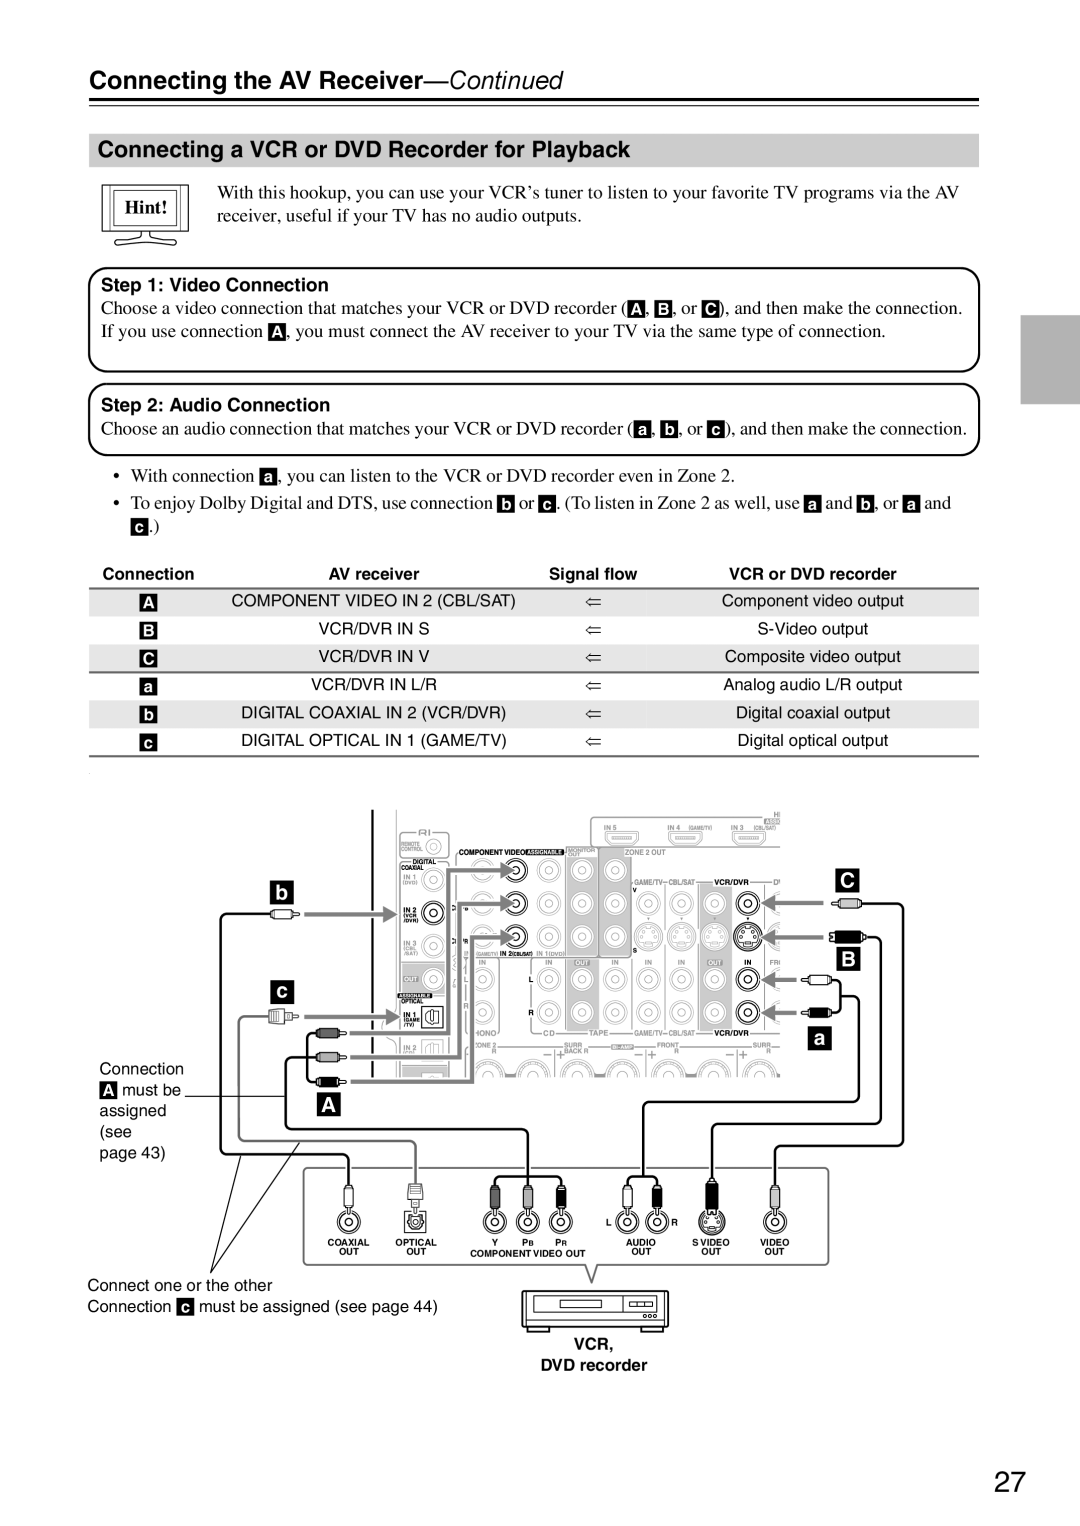 Onkyo DTR-7.9 instruction manual Connecting a VCR or DVD Recorder for Playback, Connecting the AV Receiver-Continued, Hint 